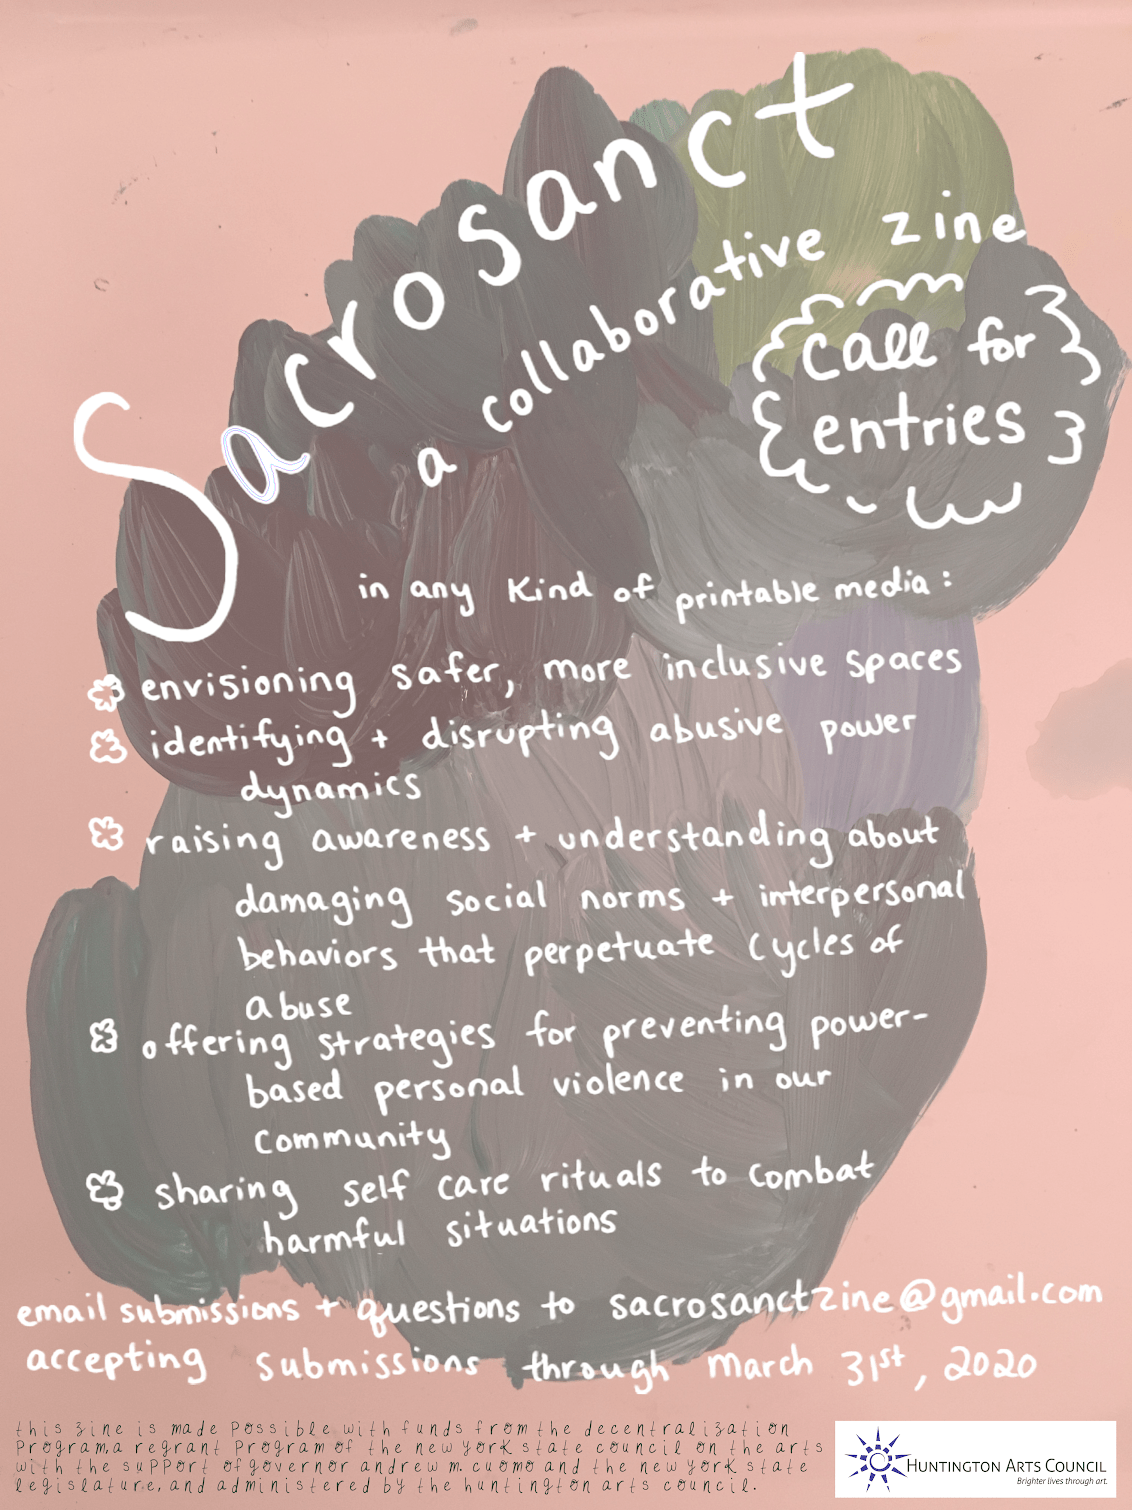 Community Resource Zine Open Call: Share Your Resources